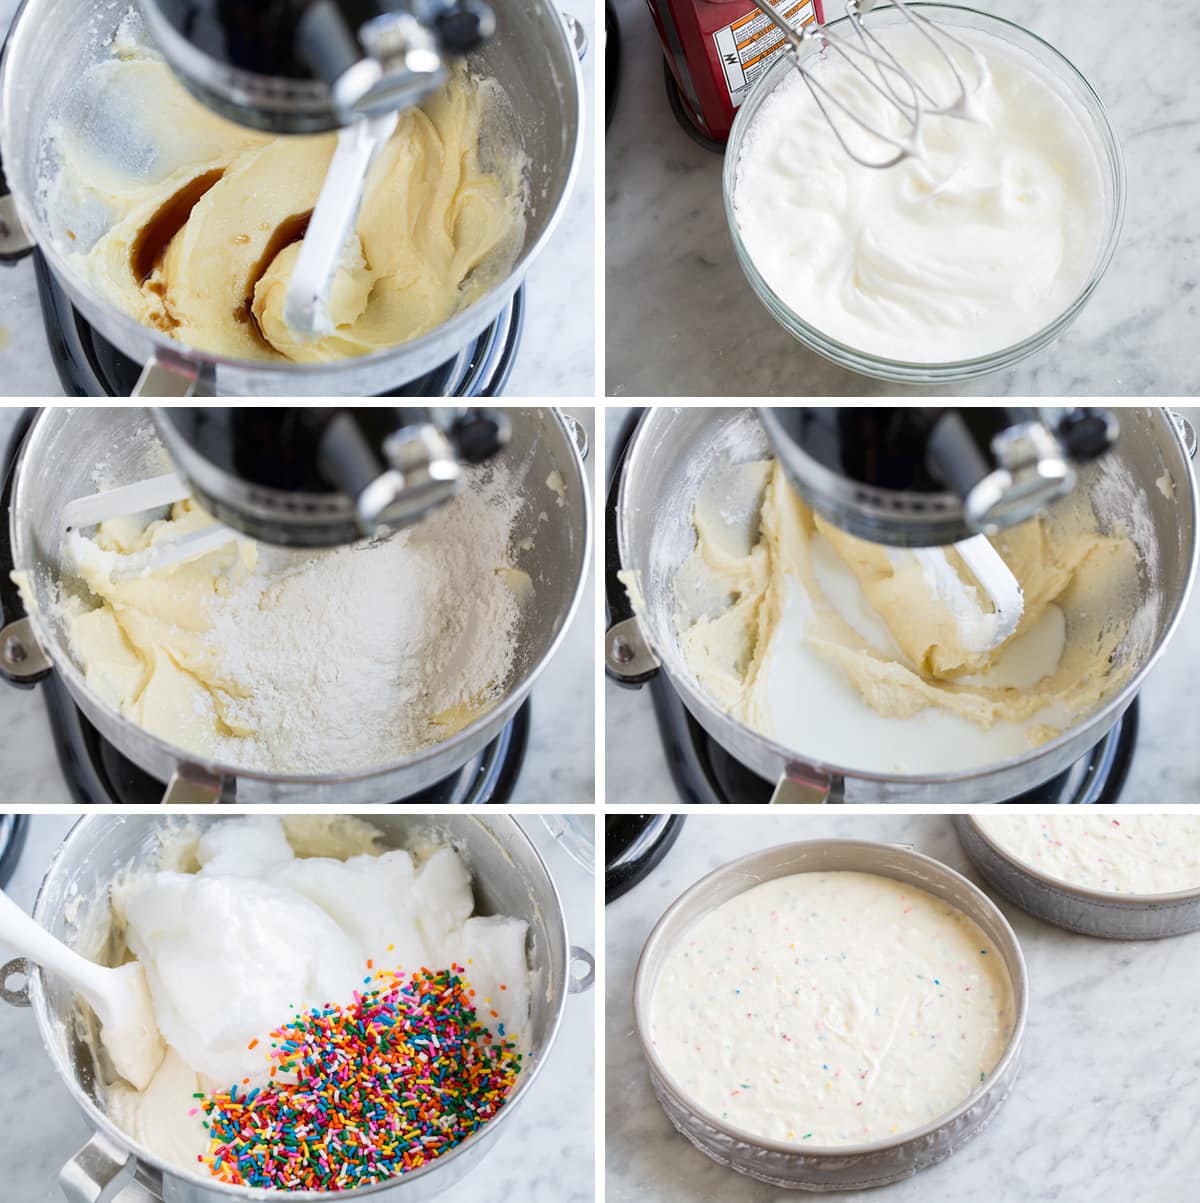 Showing more steps to make the best birthday cake including adding vanilla, whipping egg whites, adding flour mixture, milk mixture, egg whites and sprinkles to batter.